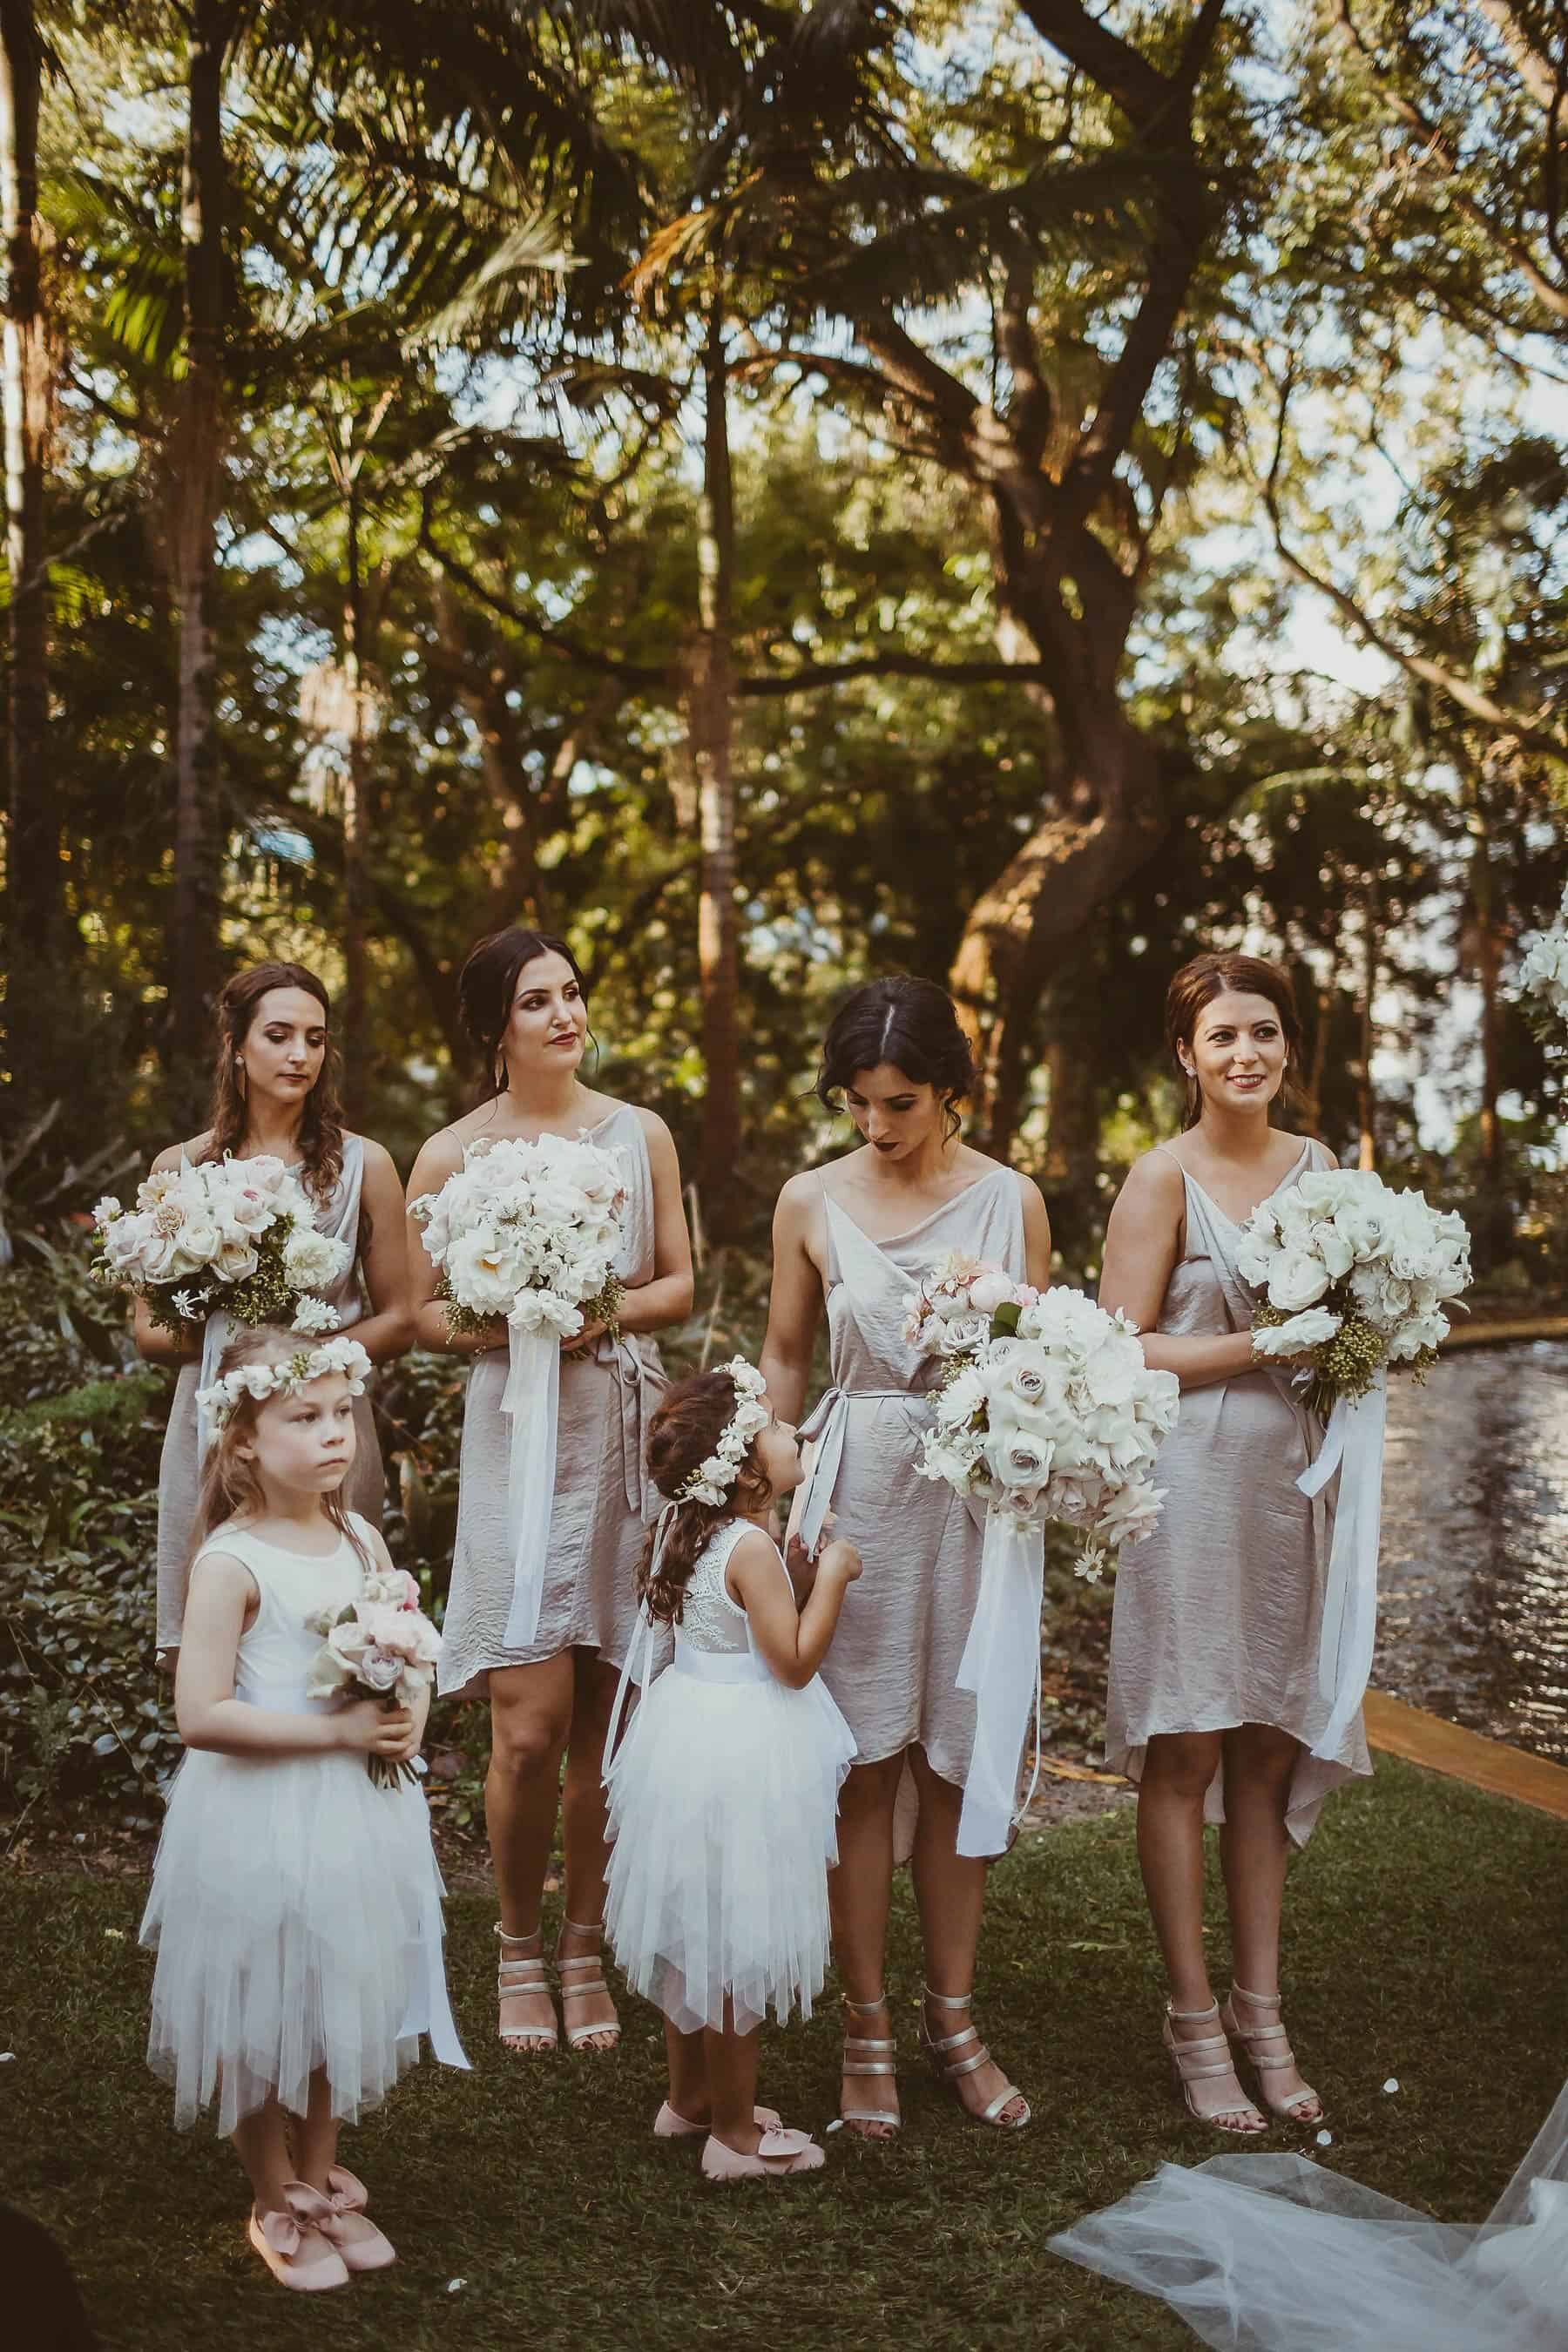 flower girls and bridesmaids in nude blush dresses